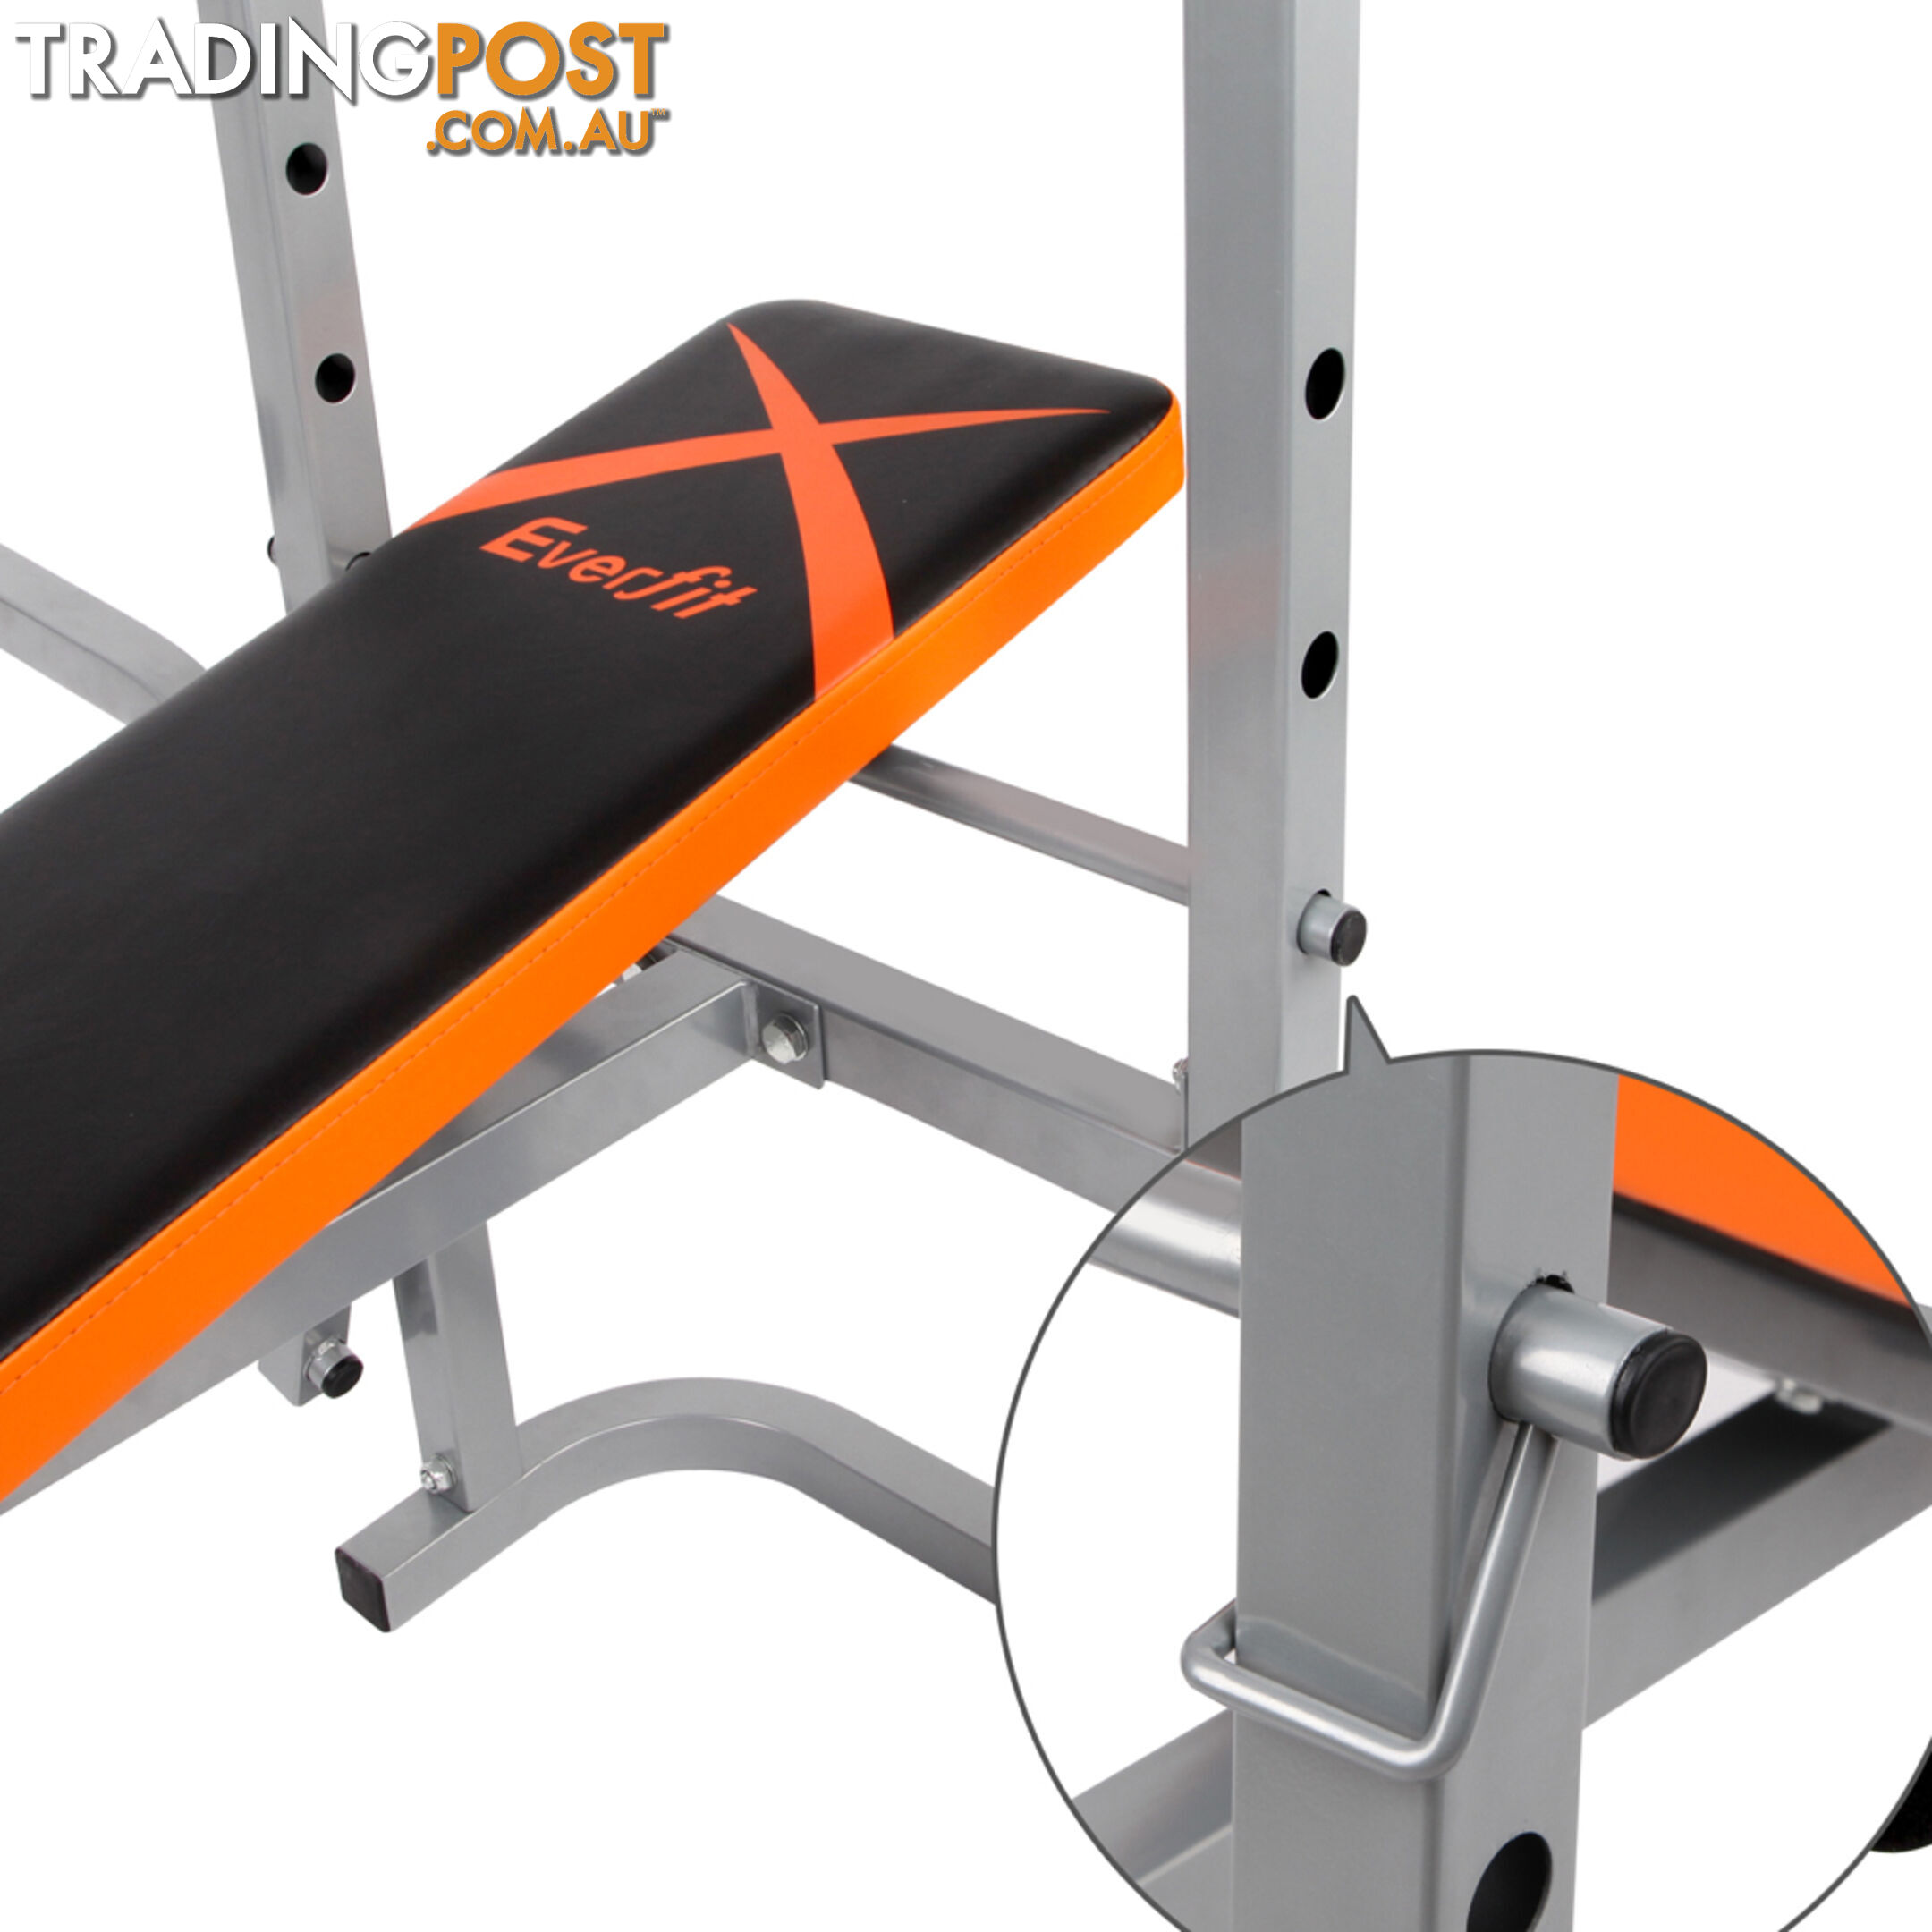 Adjustable Home Gym Multi-Station Weights Bench